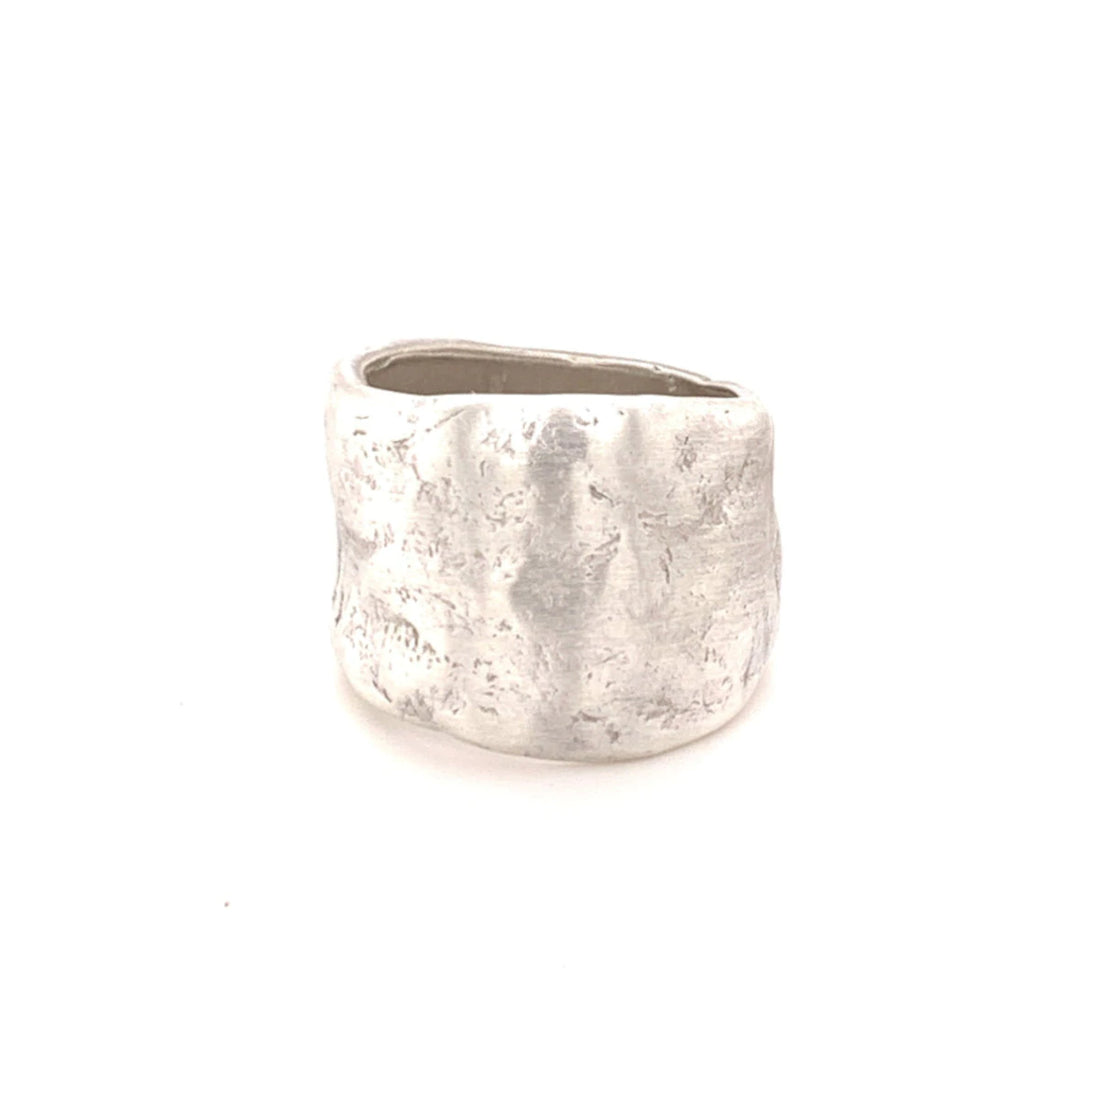 The Origin Ring features a wide band, yet it's deceptively comfortable and one of our best sellers! The art of wabi-sabi is reflected in its organic shape and texture. It celebrates beauty in imperfection and the beauty that lies within you.